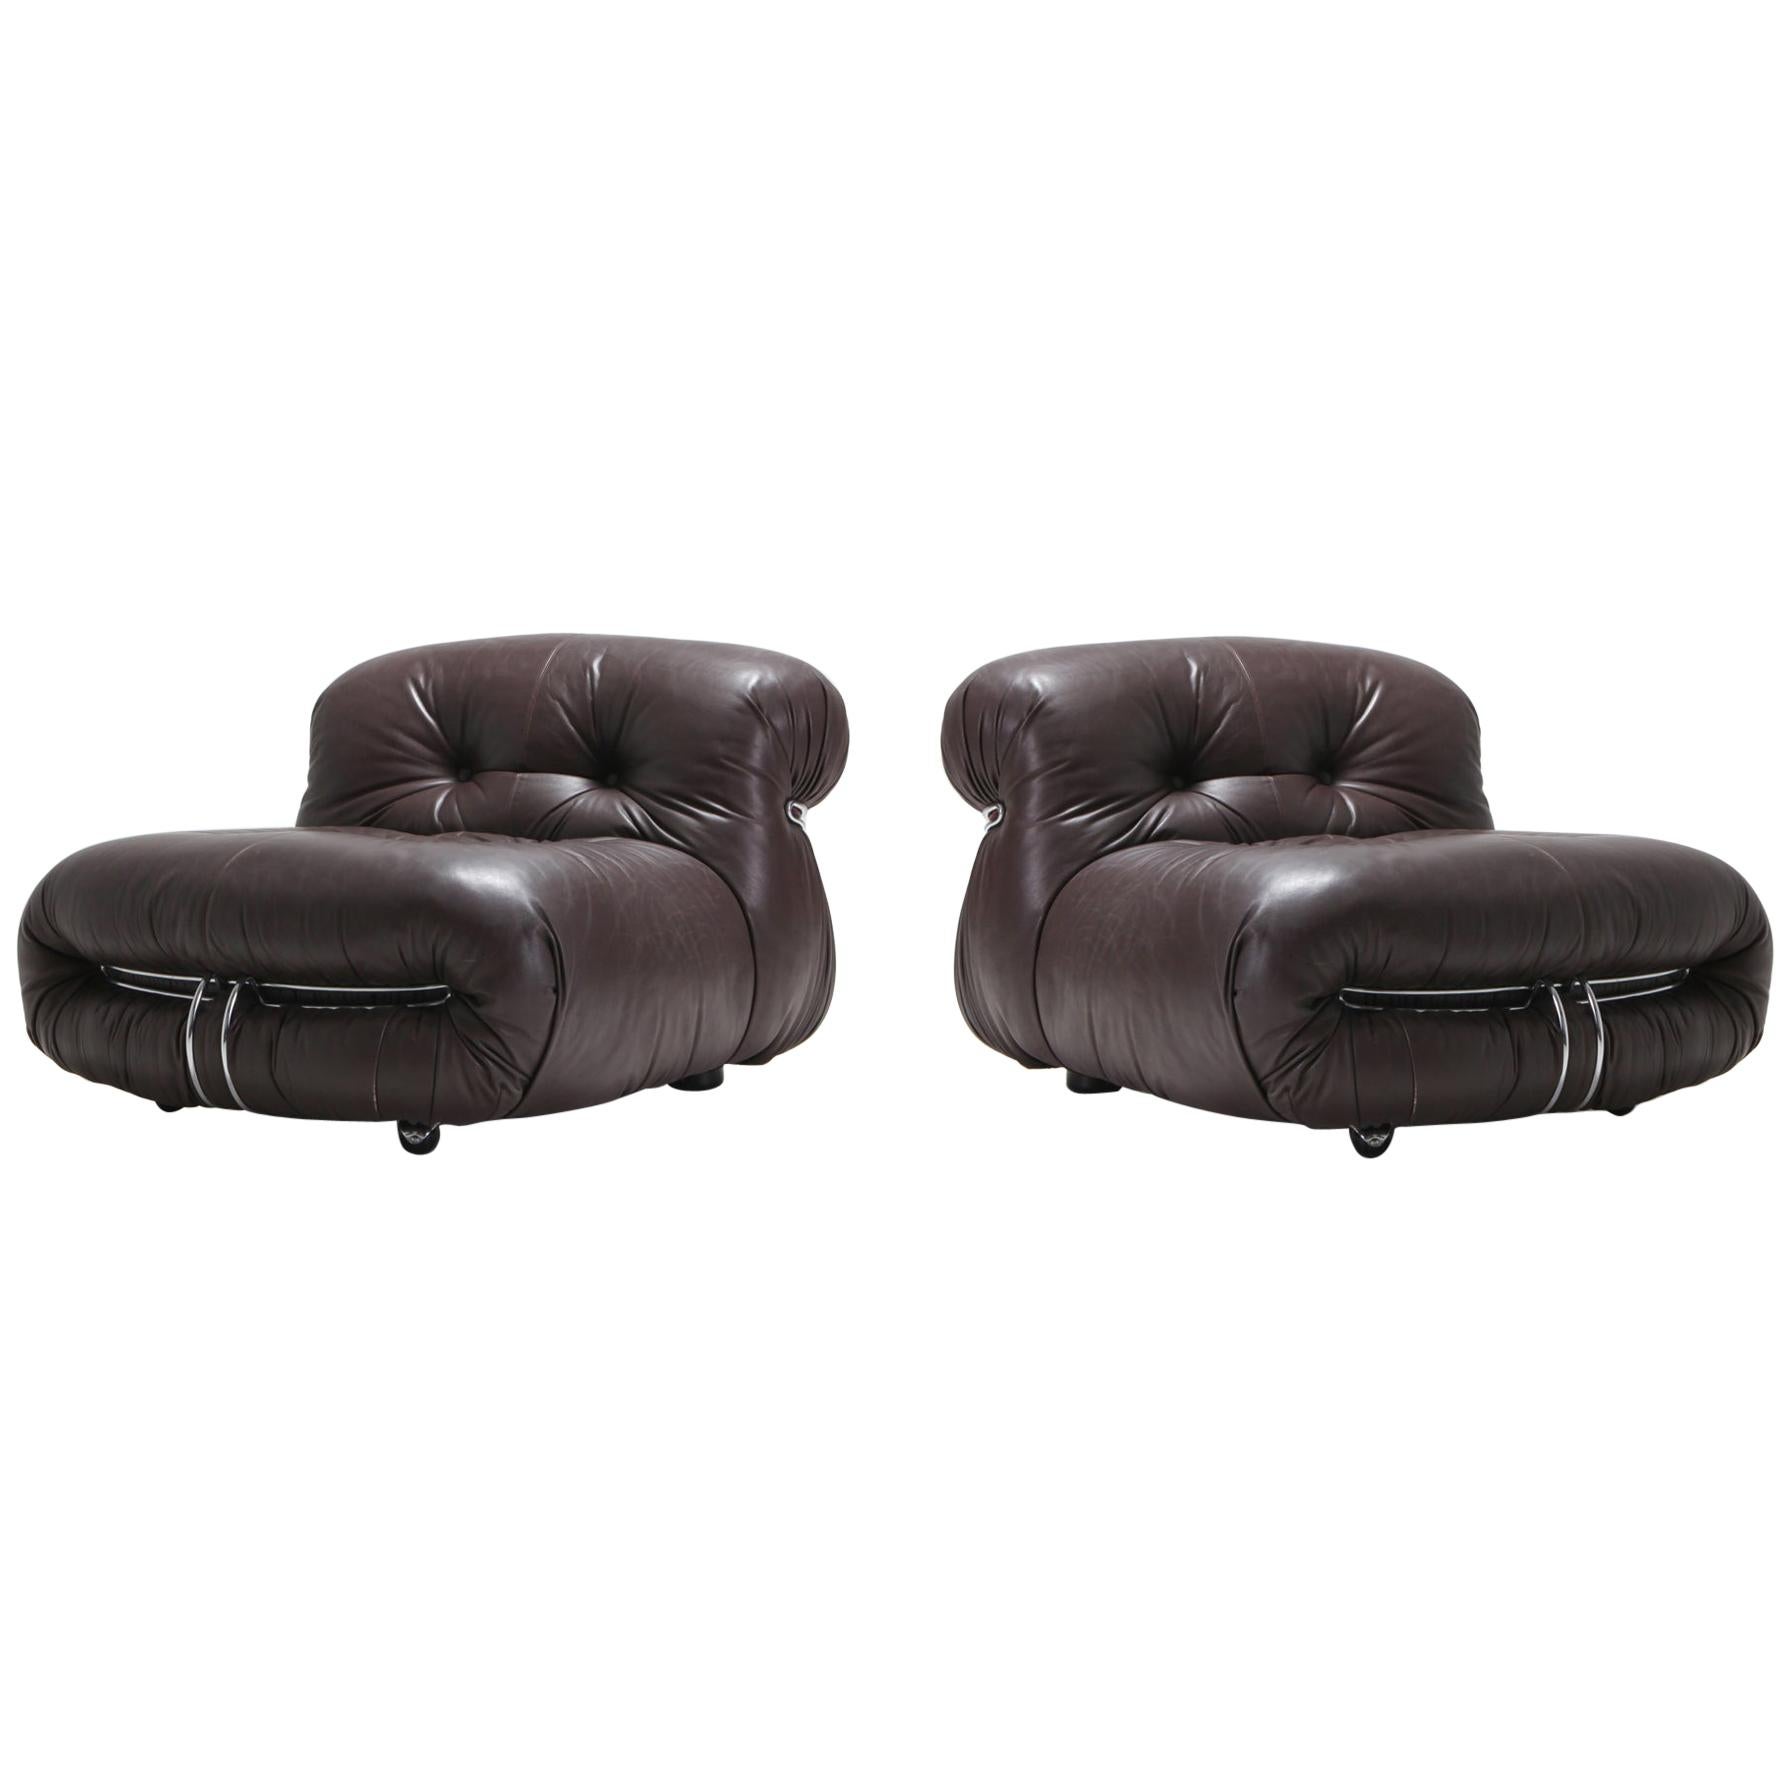 Soriana Pair of Lounge Chairs in Dark Brown Leather